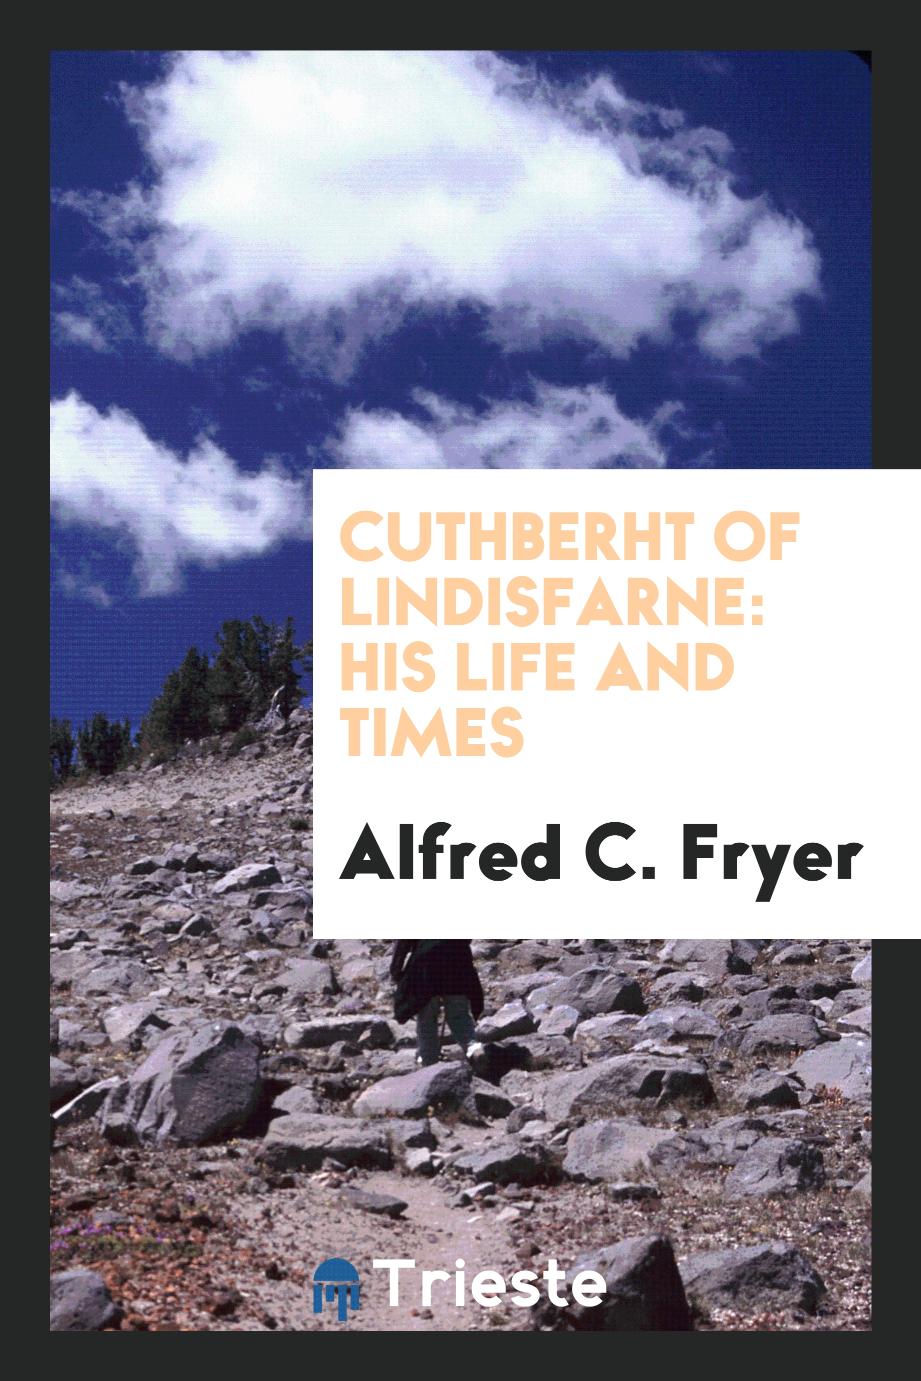 Cuthberht of Lindisfarne: His Life and Times